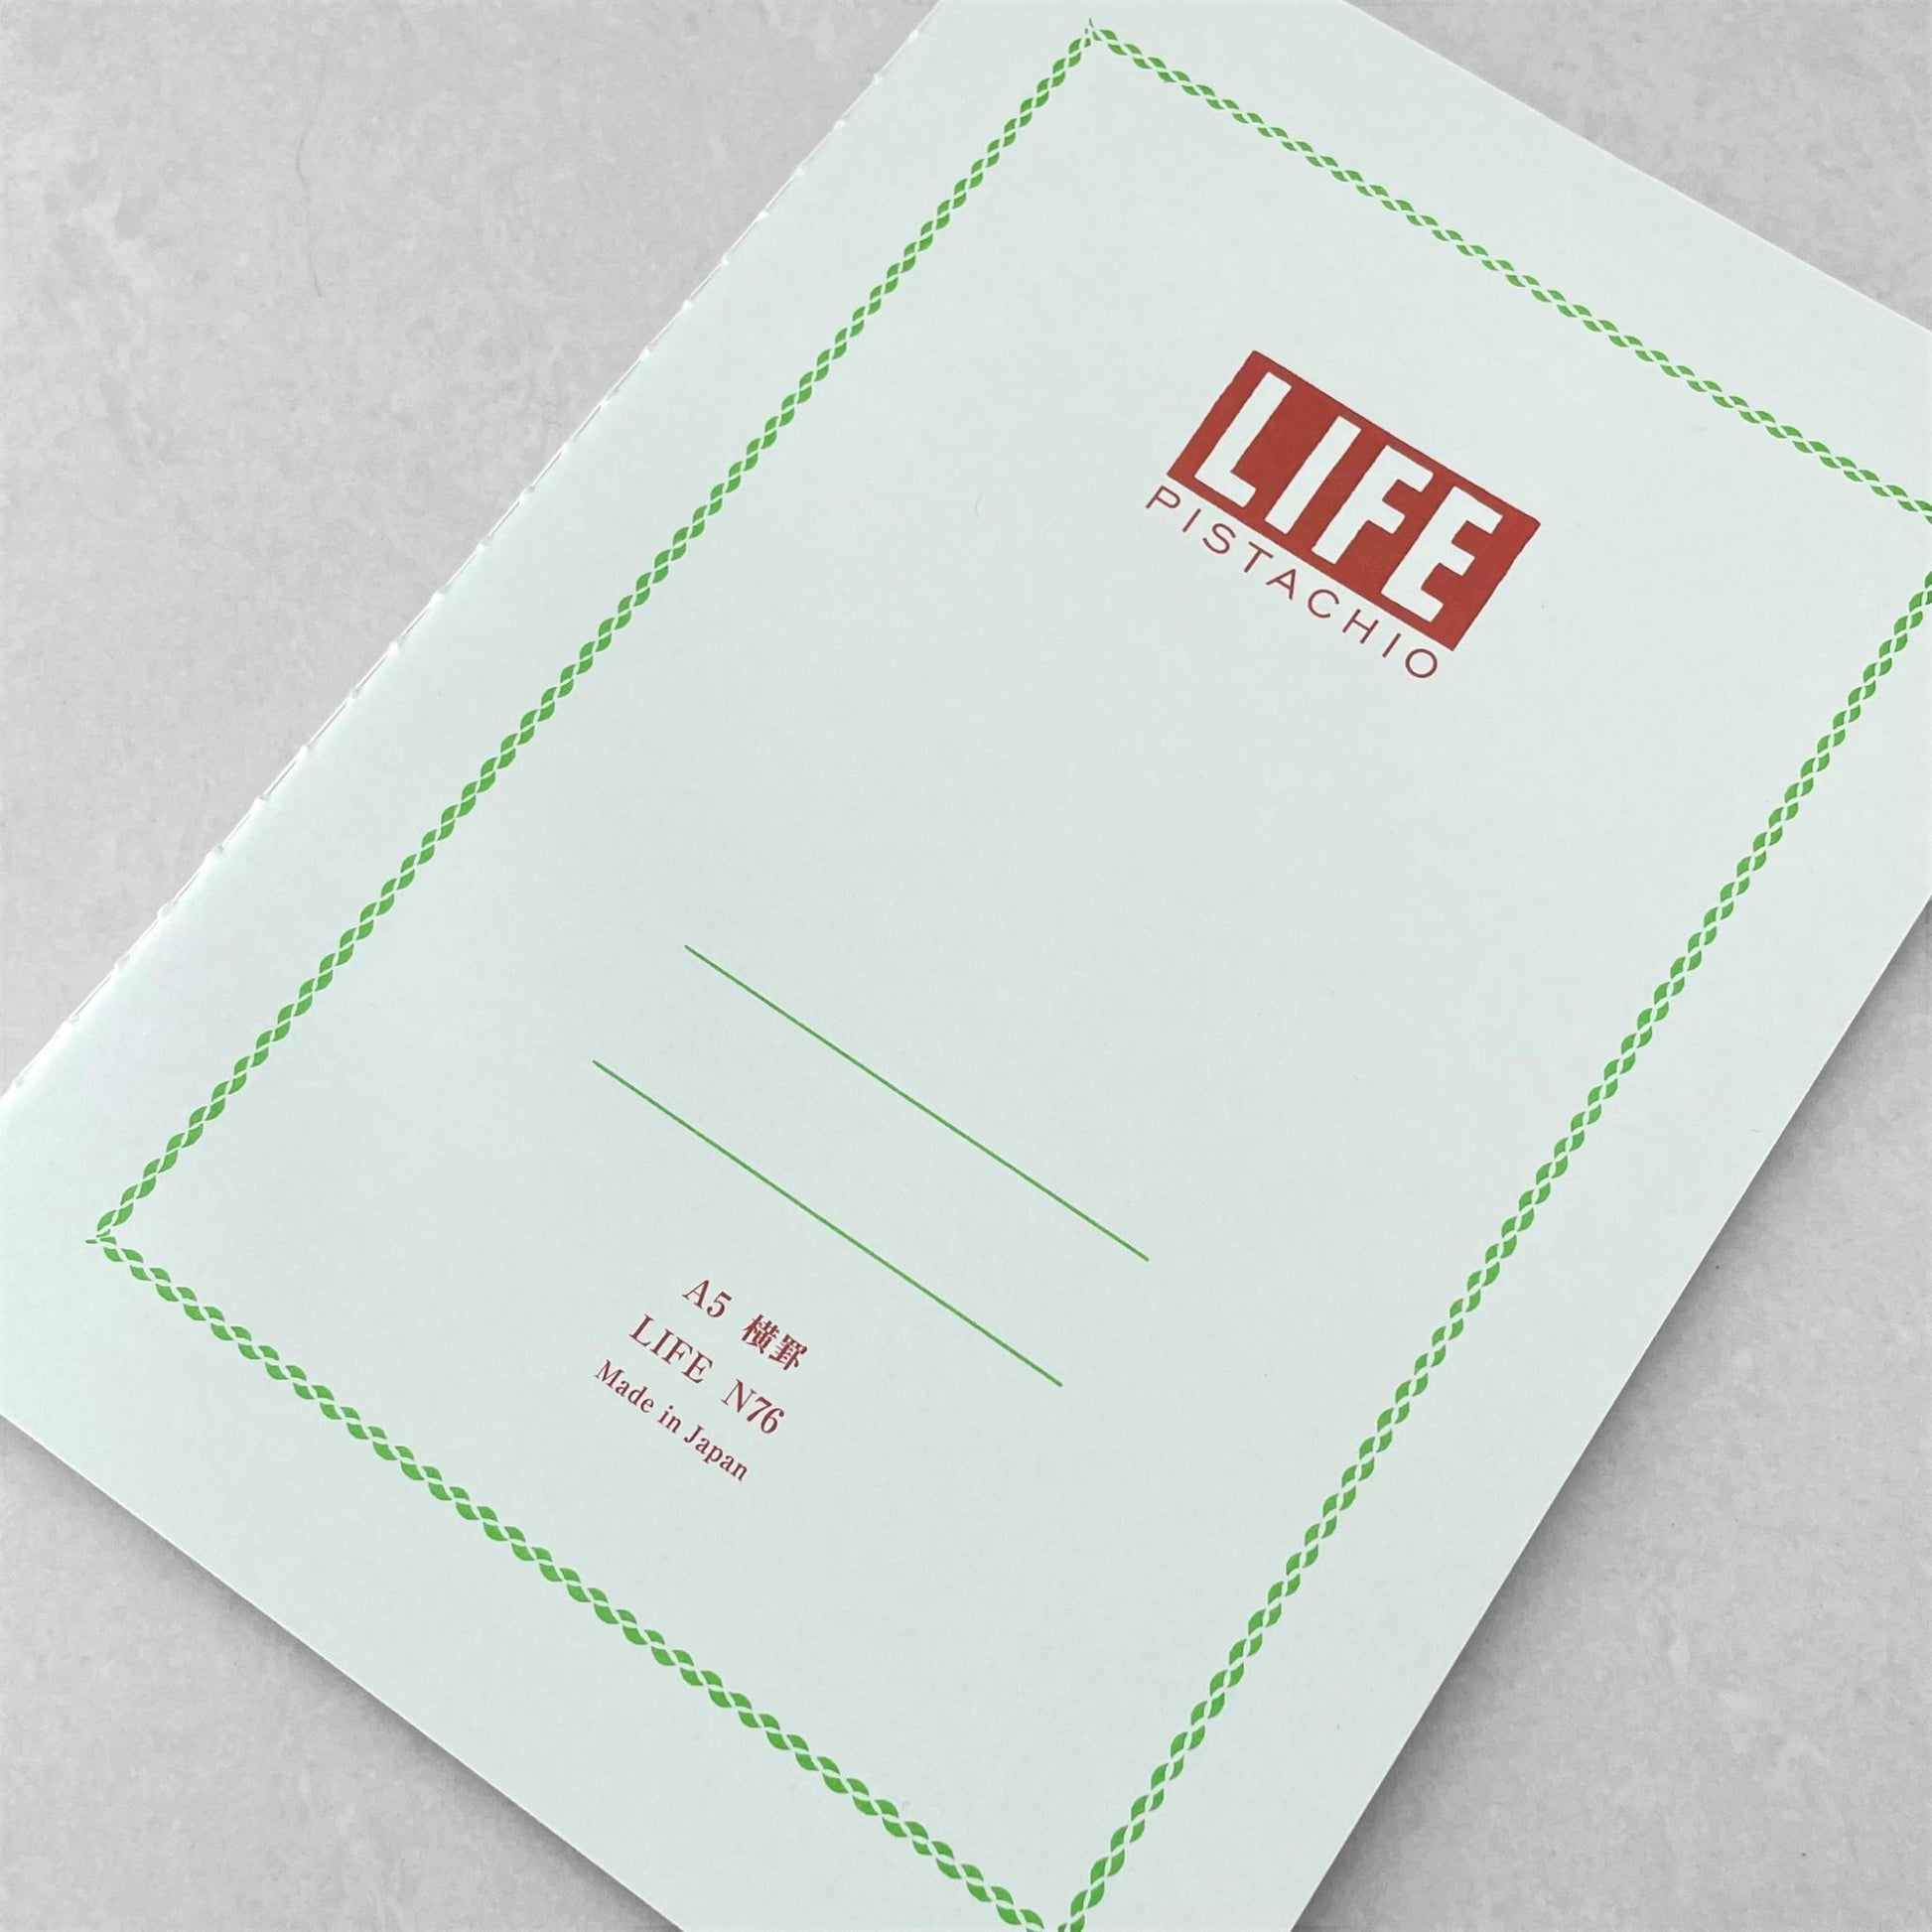 A5 softcover notebook with a soft green cover with green border and branding by Japanese brand Life Japan